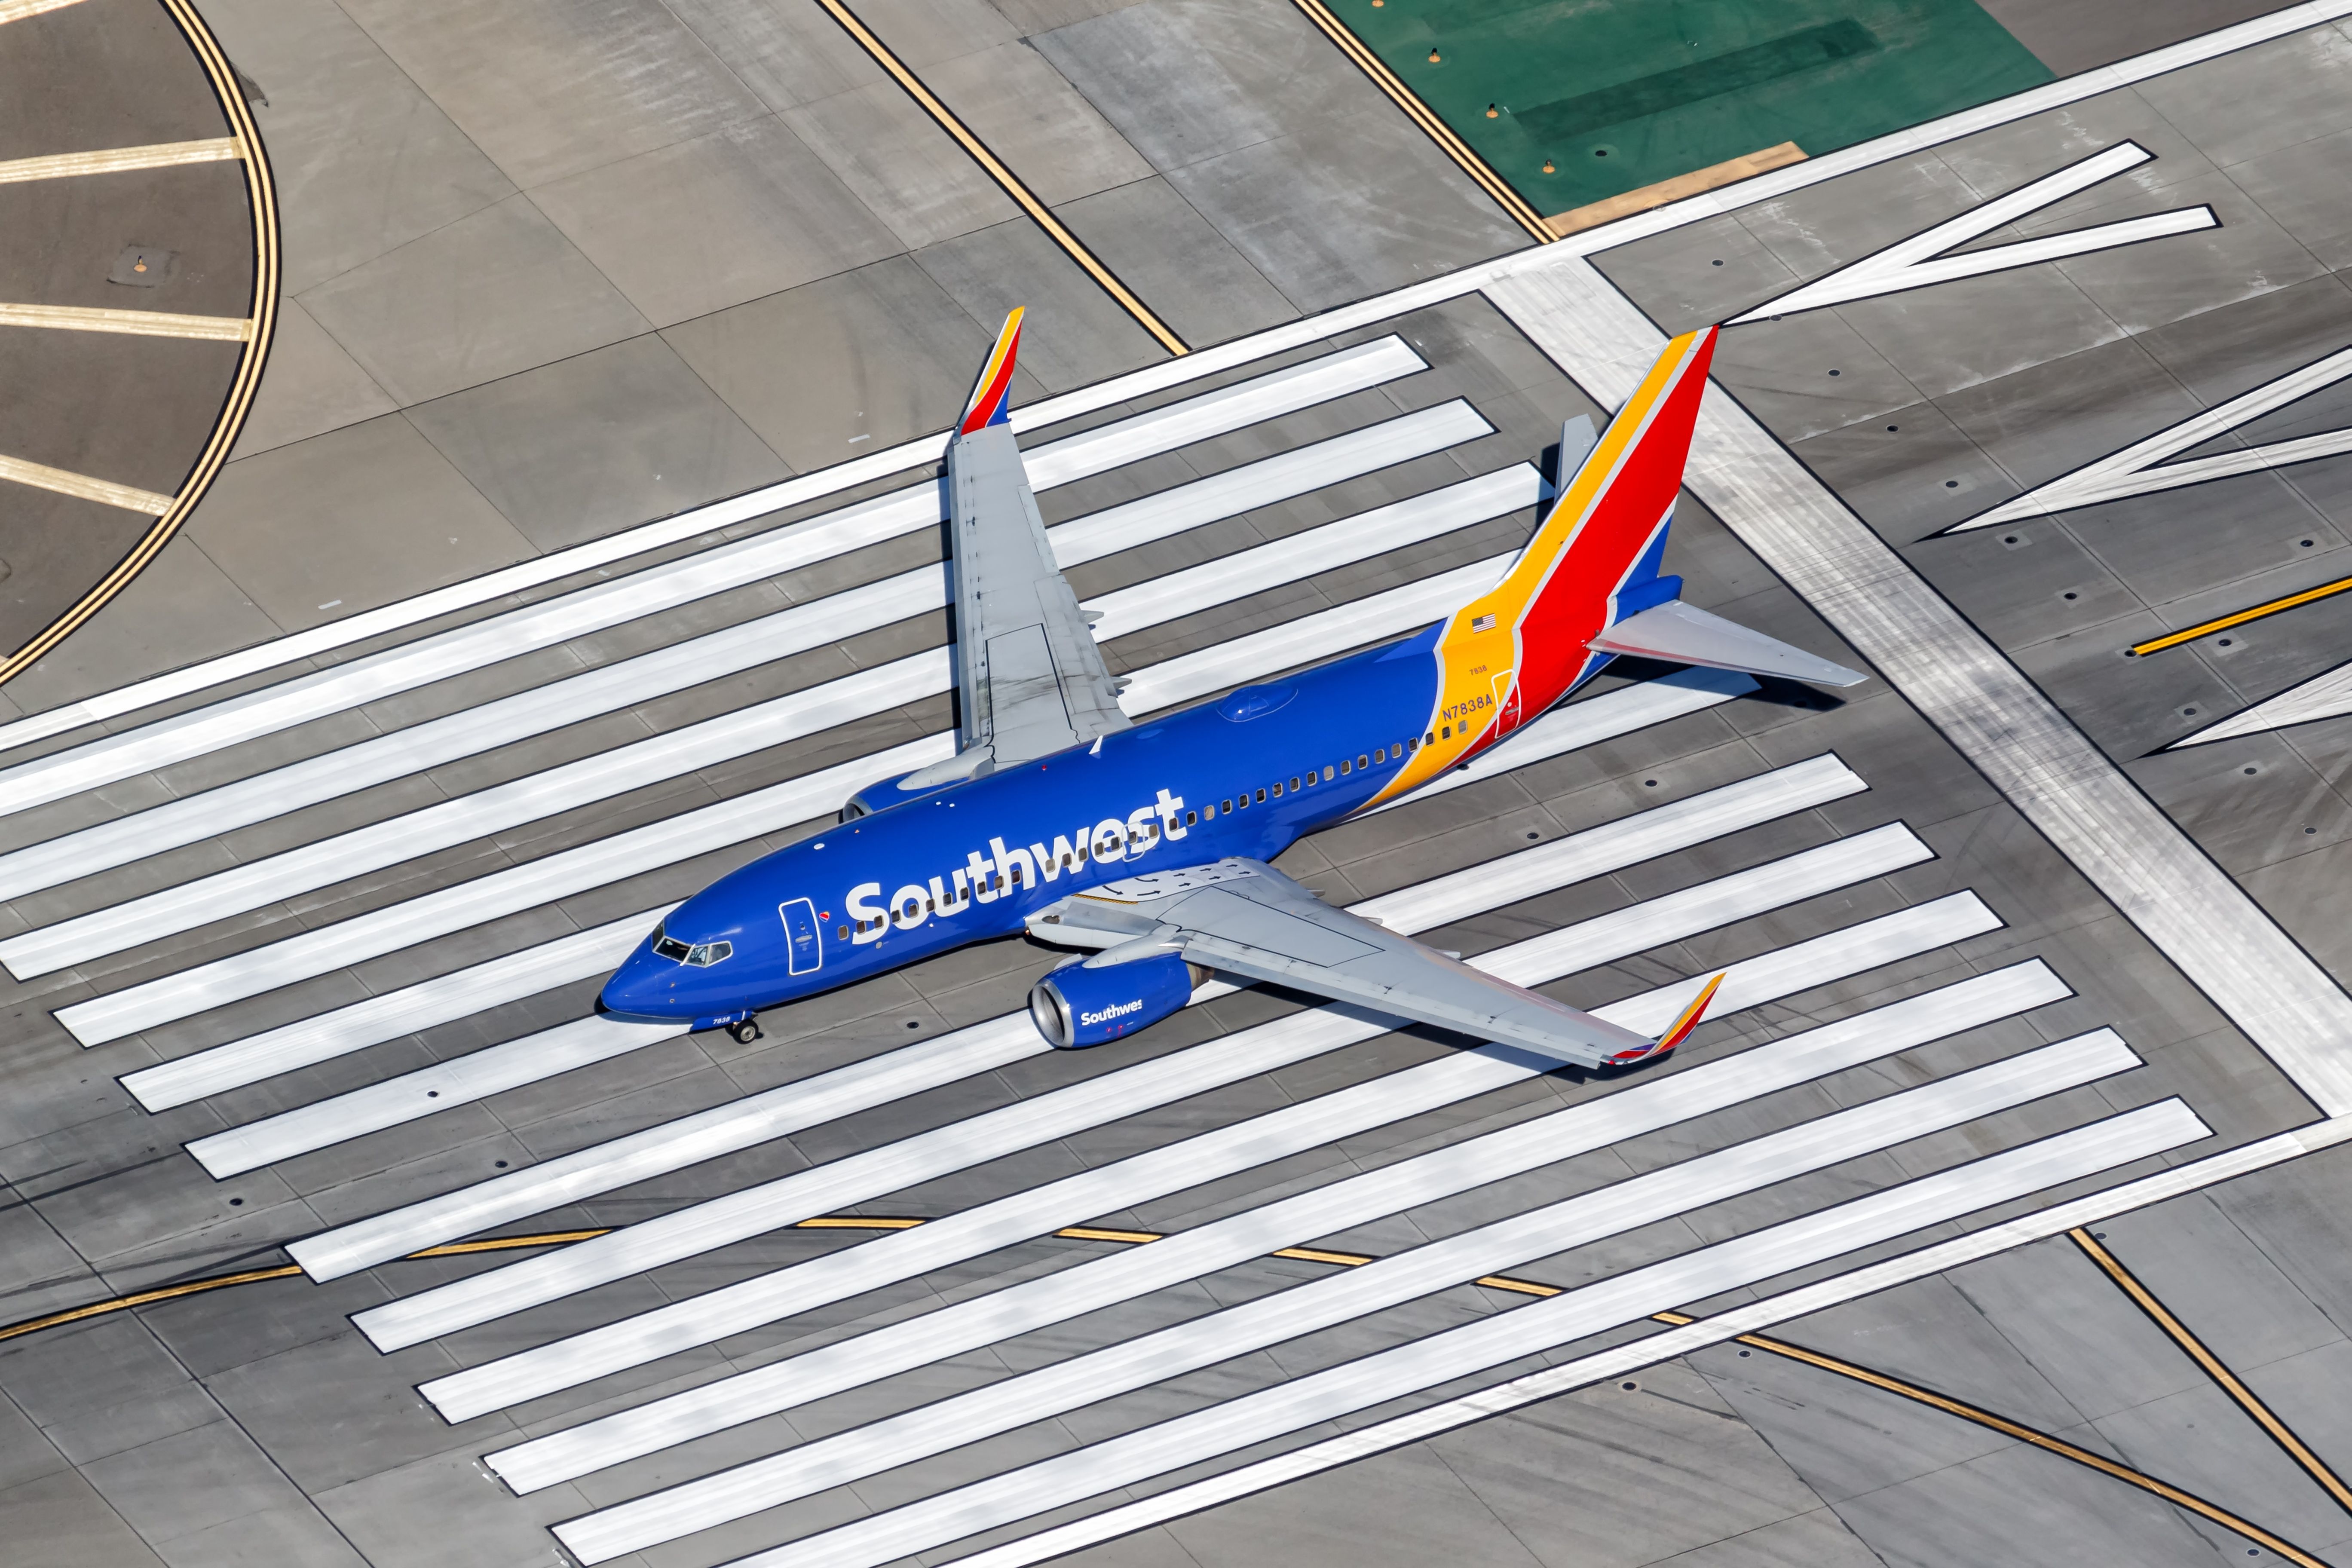 A Southwest Airlines Boeing 737-700 ready for departure